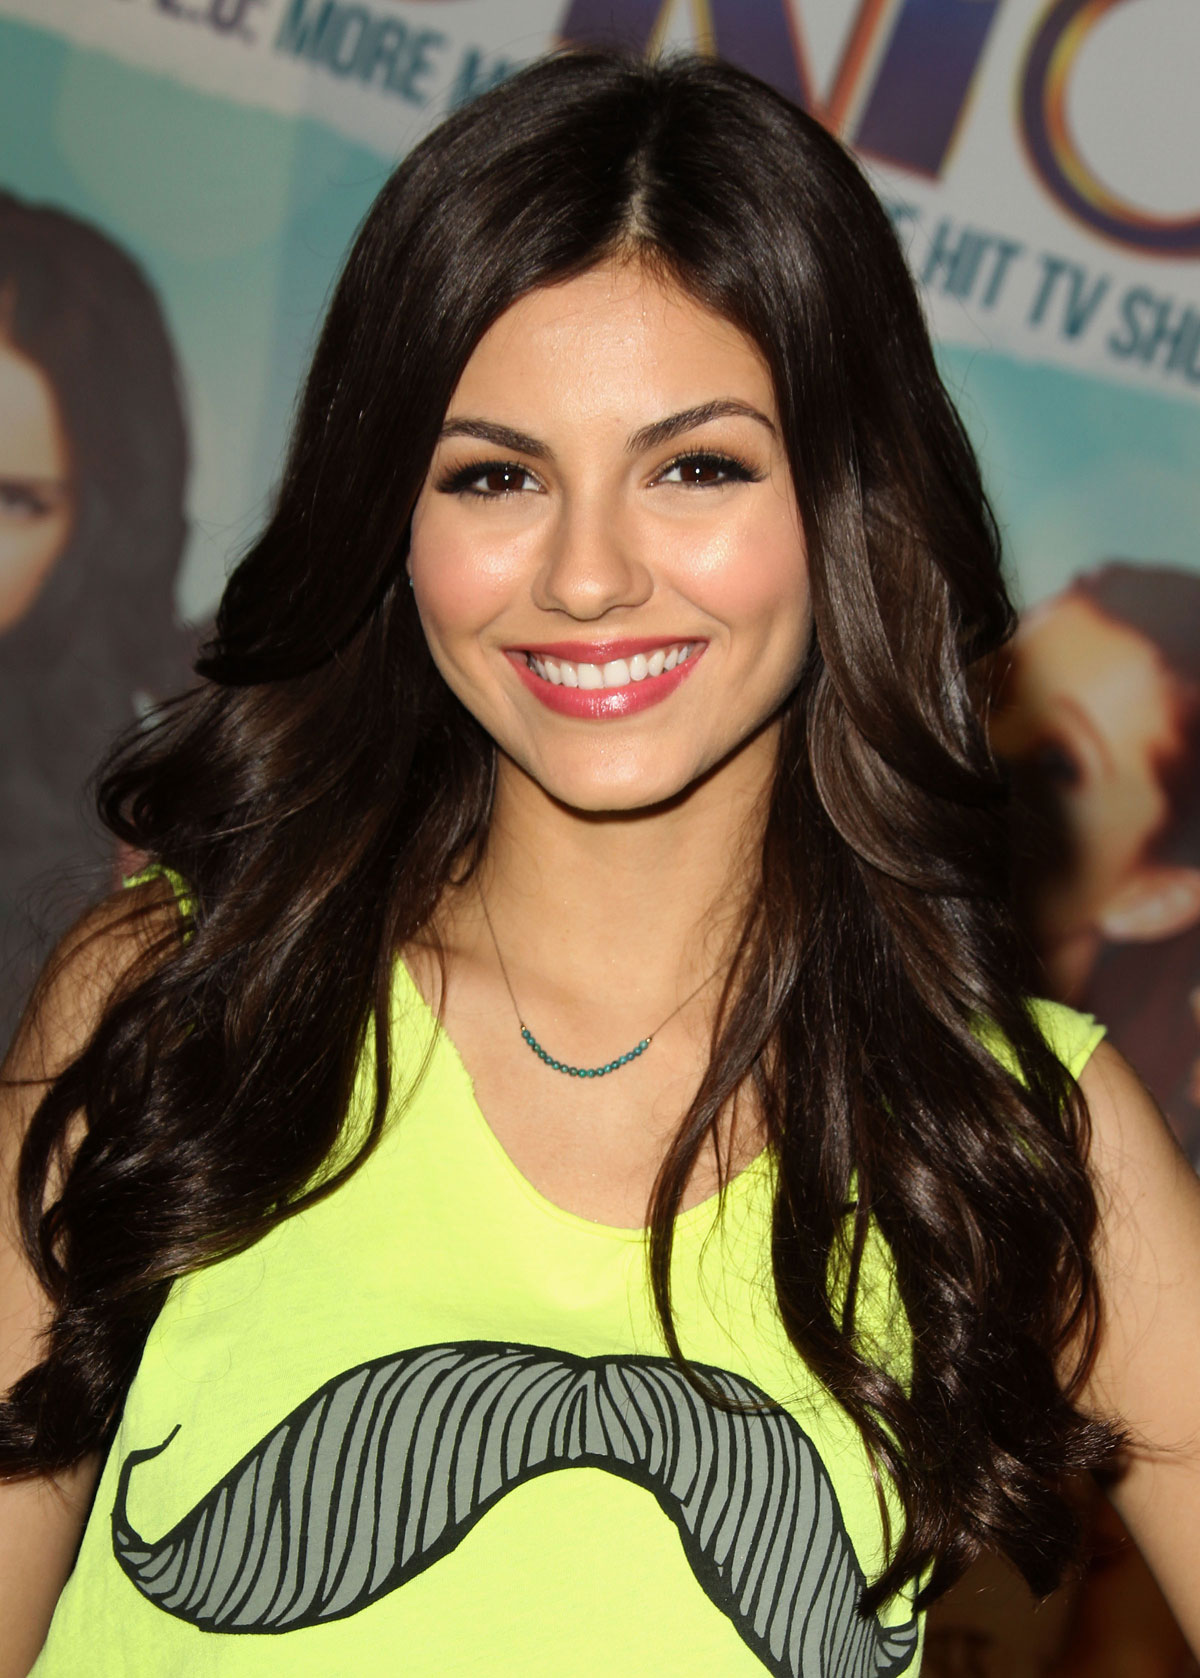 http://www.hawtcelebs.com/wp-content/uploads/2012/06/VICTORIA-JUSTICE-at-Victorious-Soundtrack-Signing-at-the-Universal-CityWalk-in-Hollywood-7.jpg